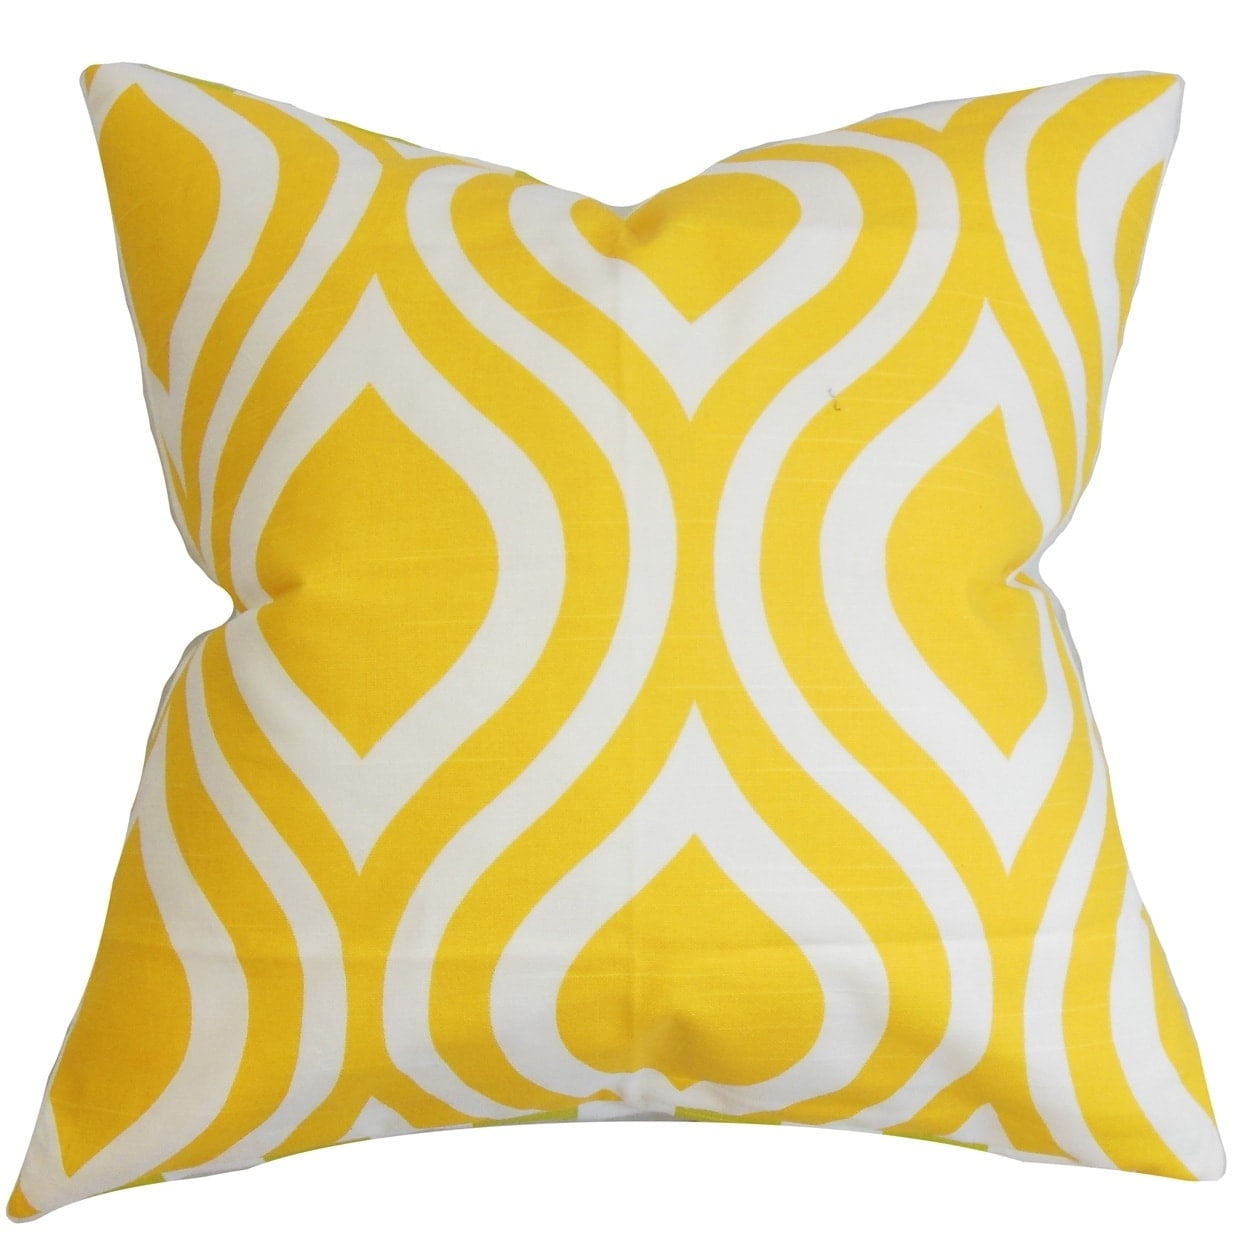 Ginger The Pillow Collection P18-BAR-M9583-GINGER-P91N9 Xyla Solid Pillow